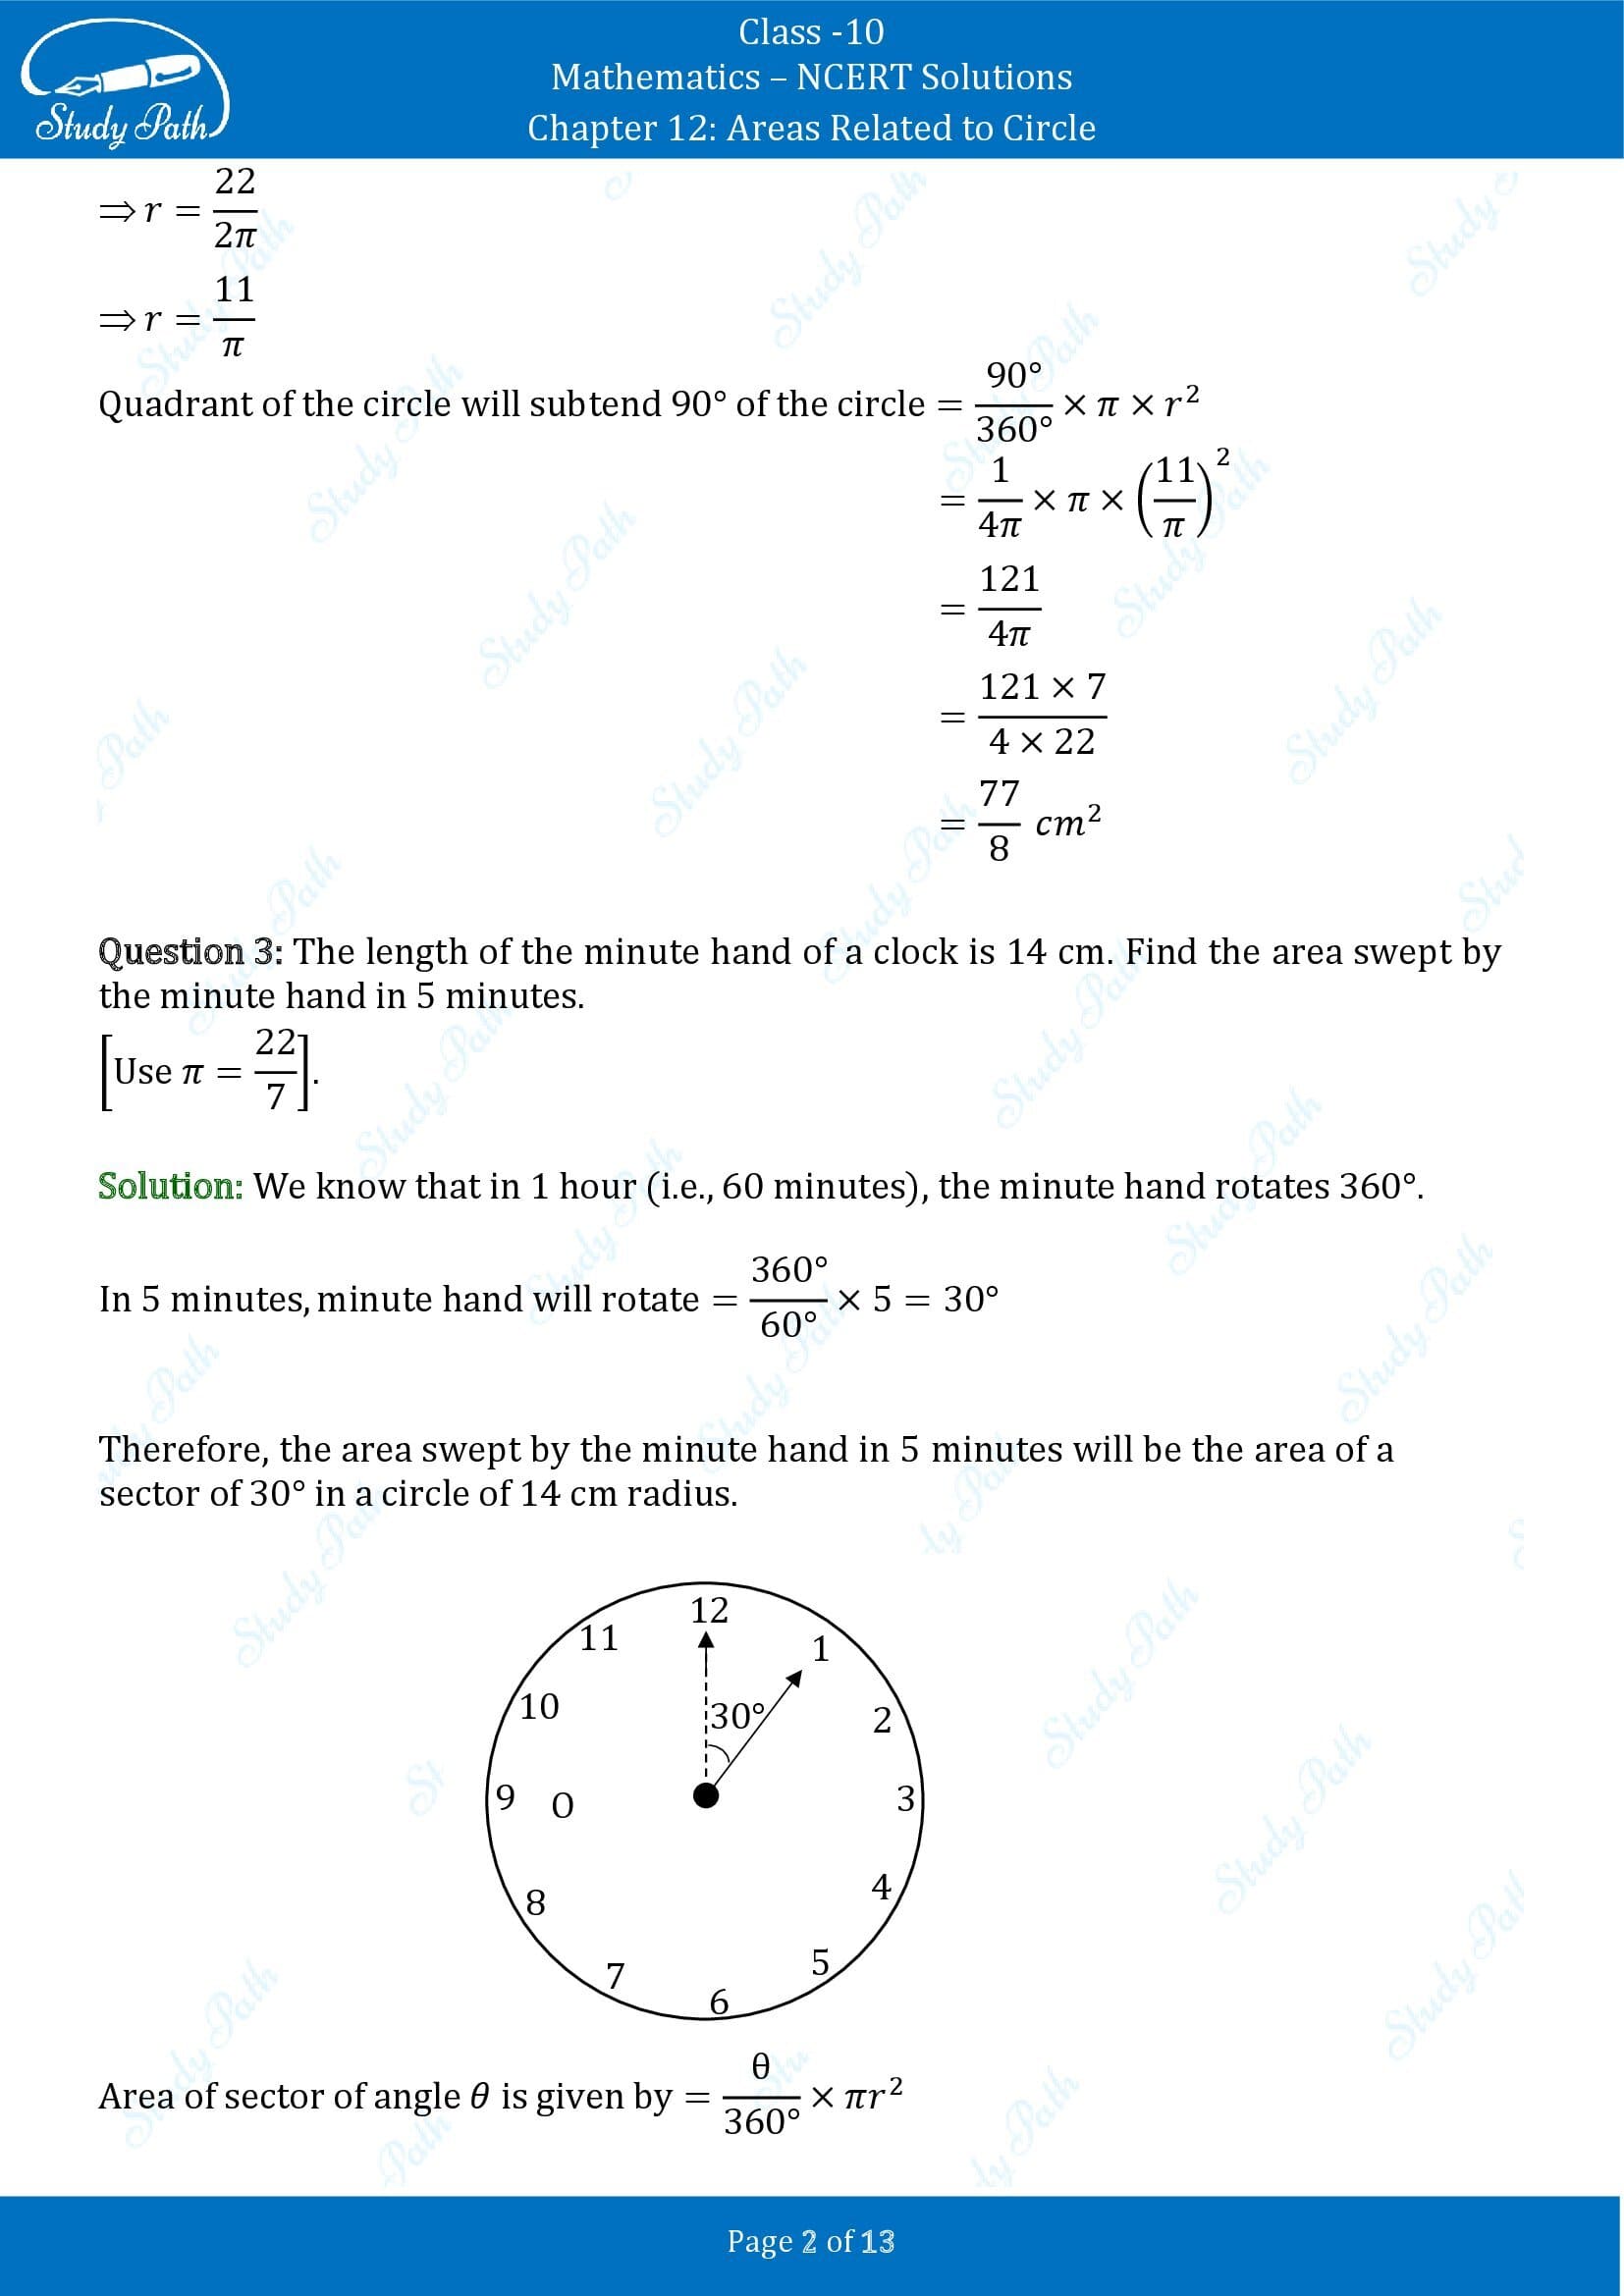 NCERT Solutions for Class 10 Maths Chapter 12 Areas Related to Circles Exercise 12.2 00002